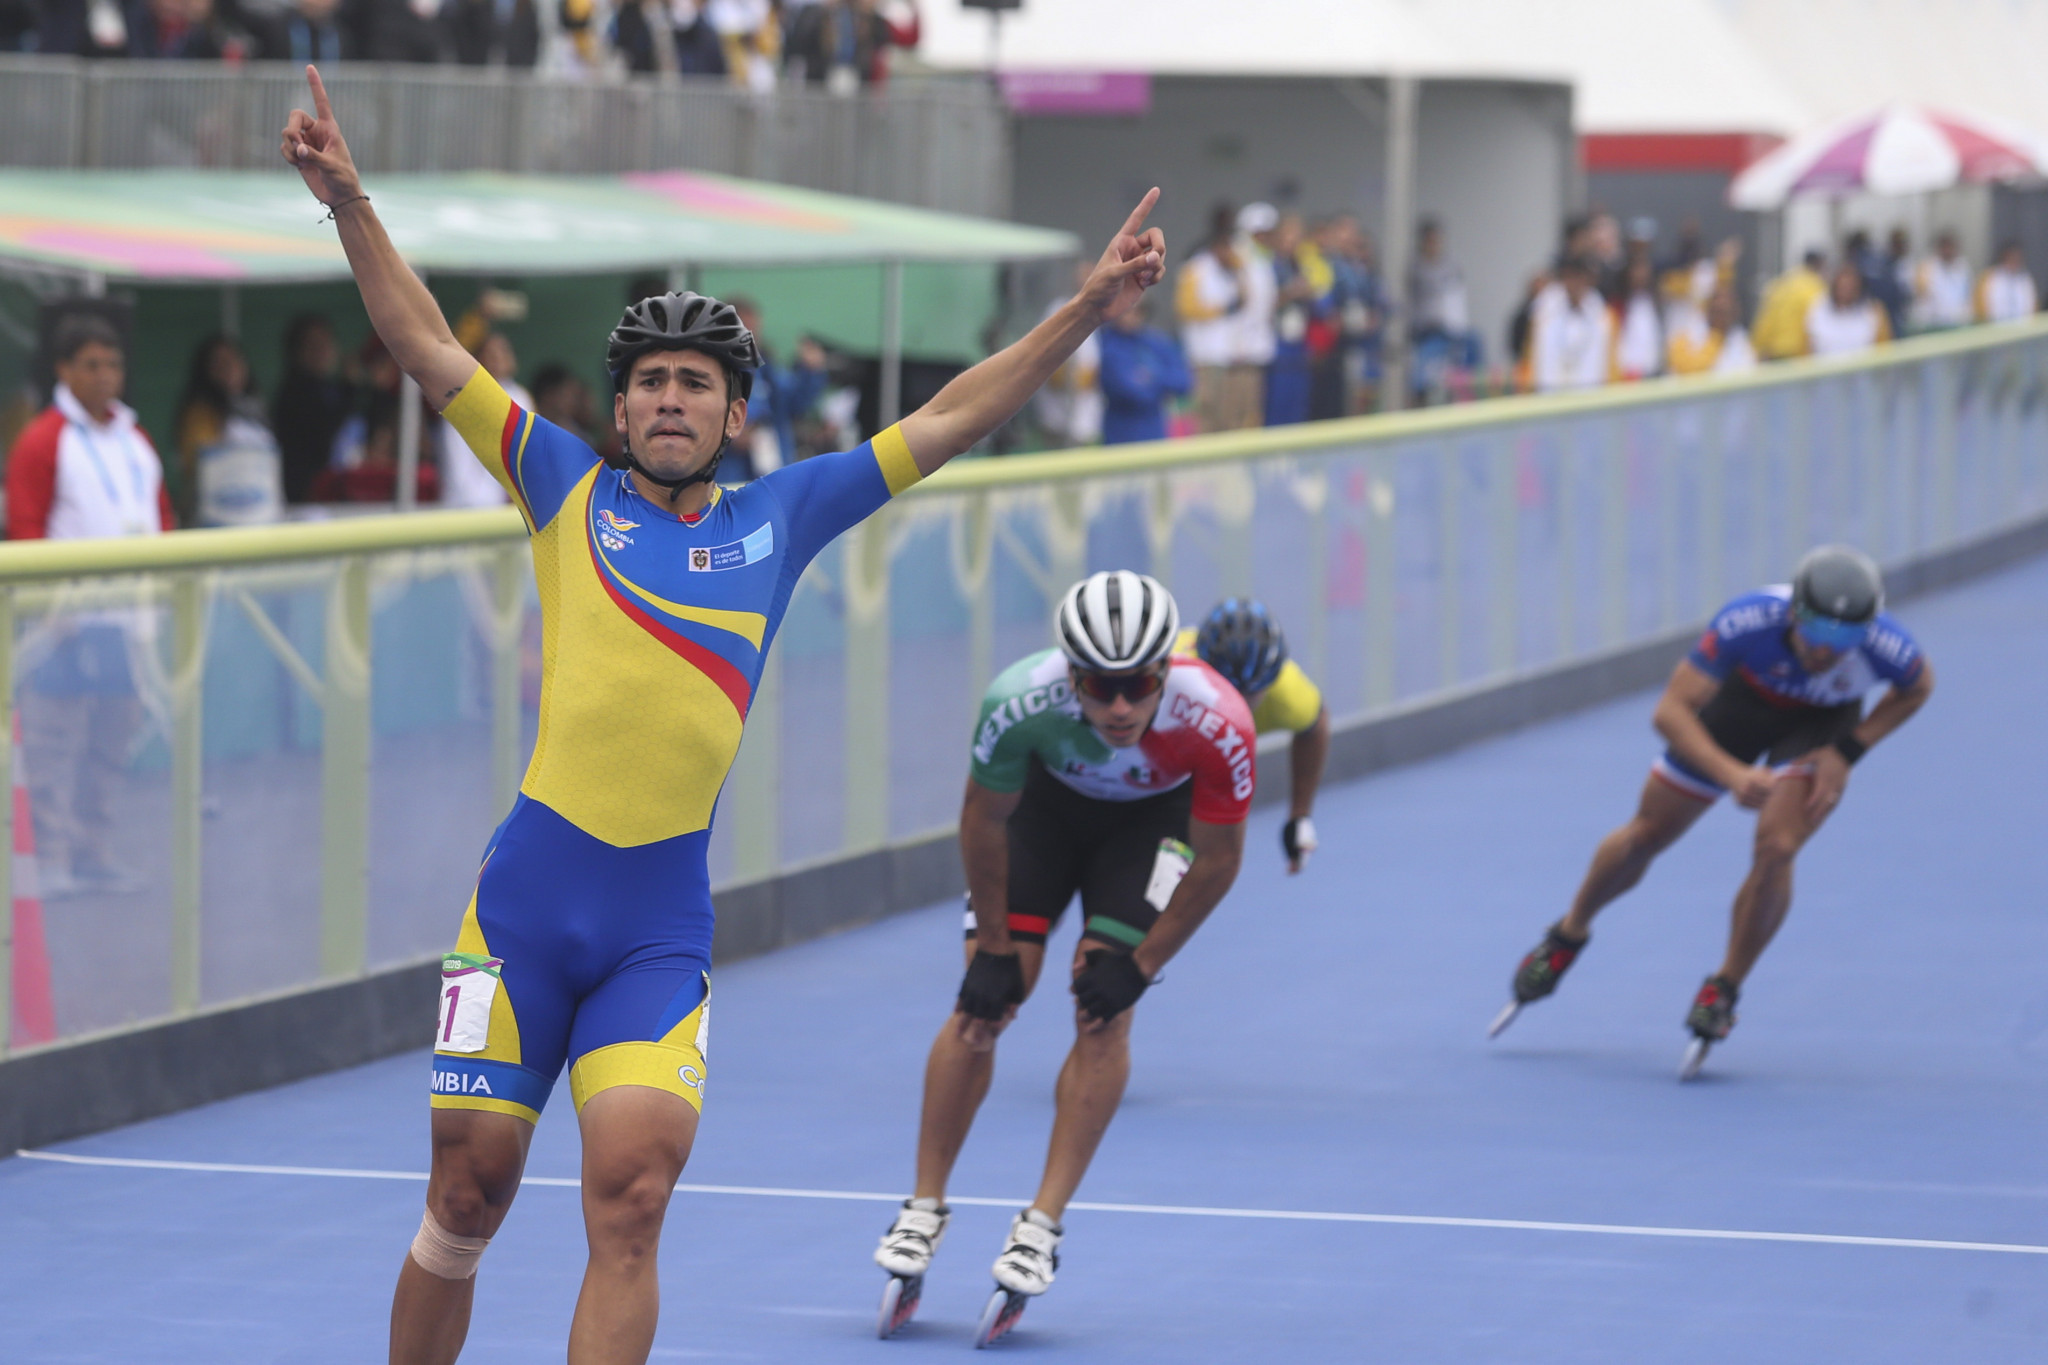 Colombia earned four speed skating medals at Lima 2019 ©Lima 2019